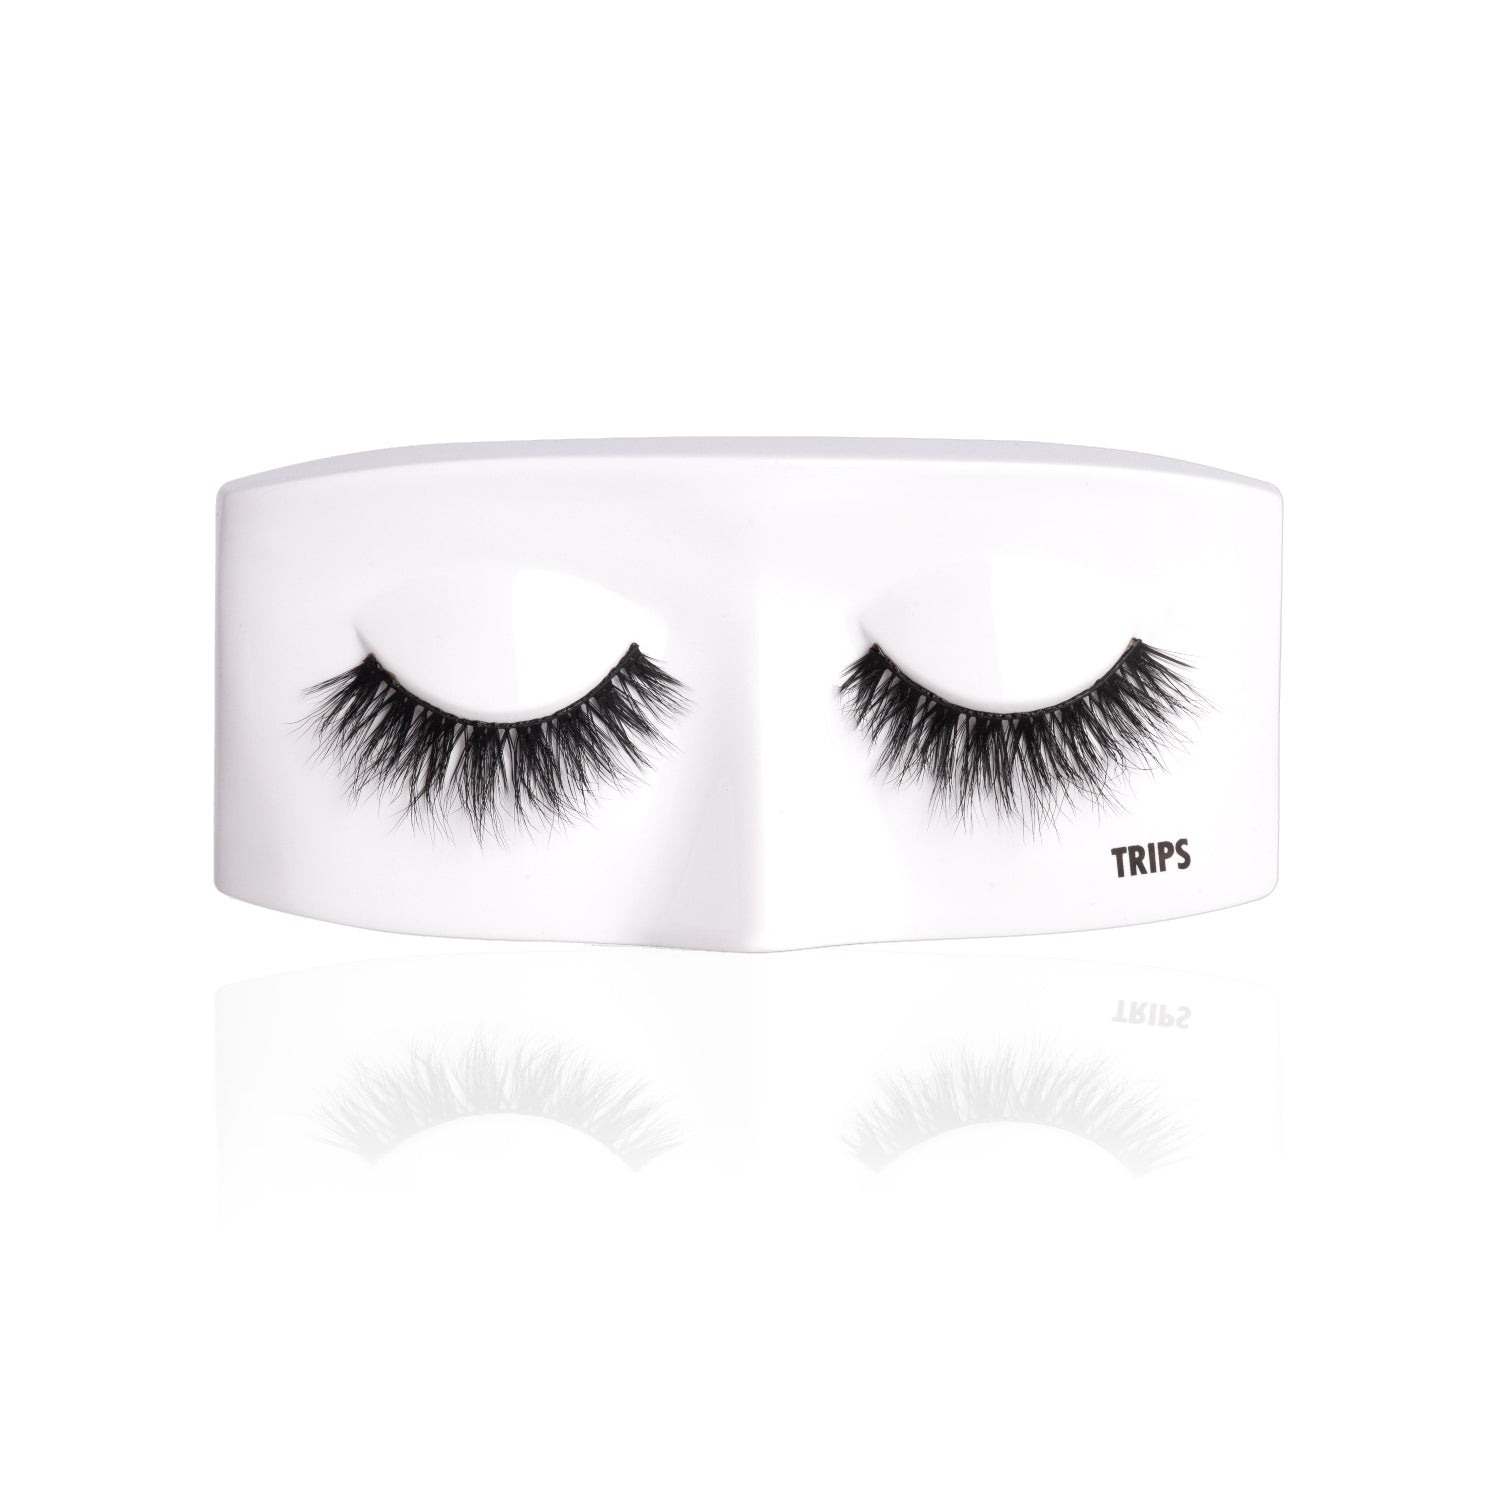 PAC Cosmetics Ace of Lashes (1 Pair) #Color_Trips